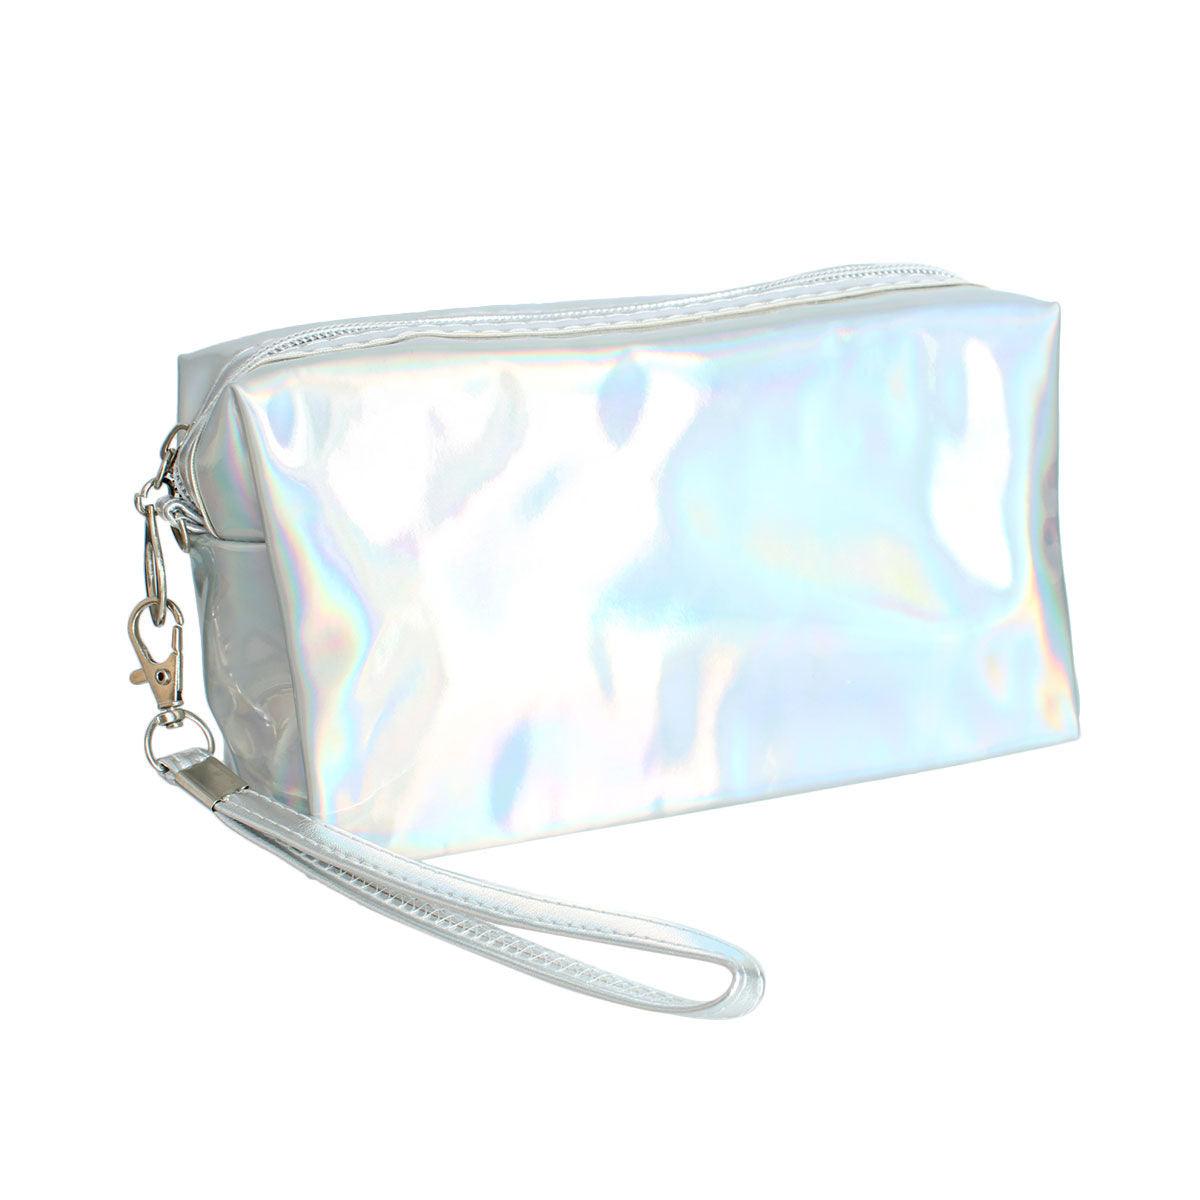 Silver Cosmetic Pouch Bag for Women is Convenient and Practical